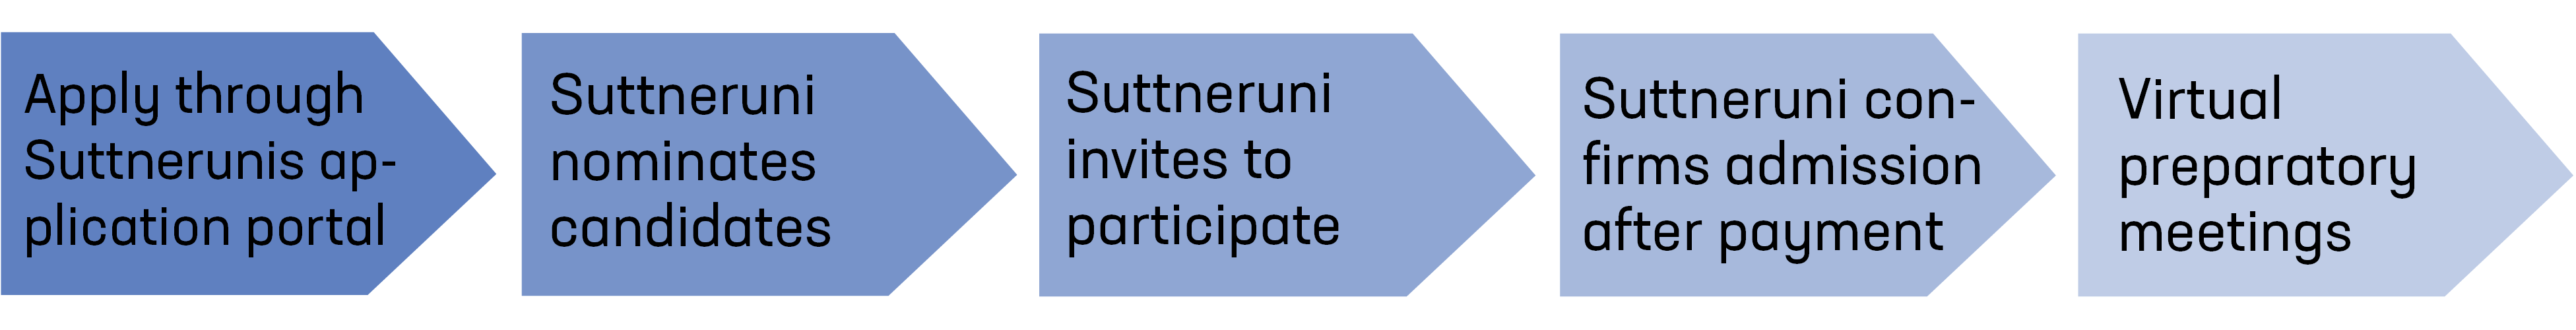 Process overview for independent applicants and members of Suttneruni